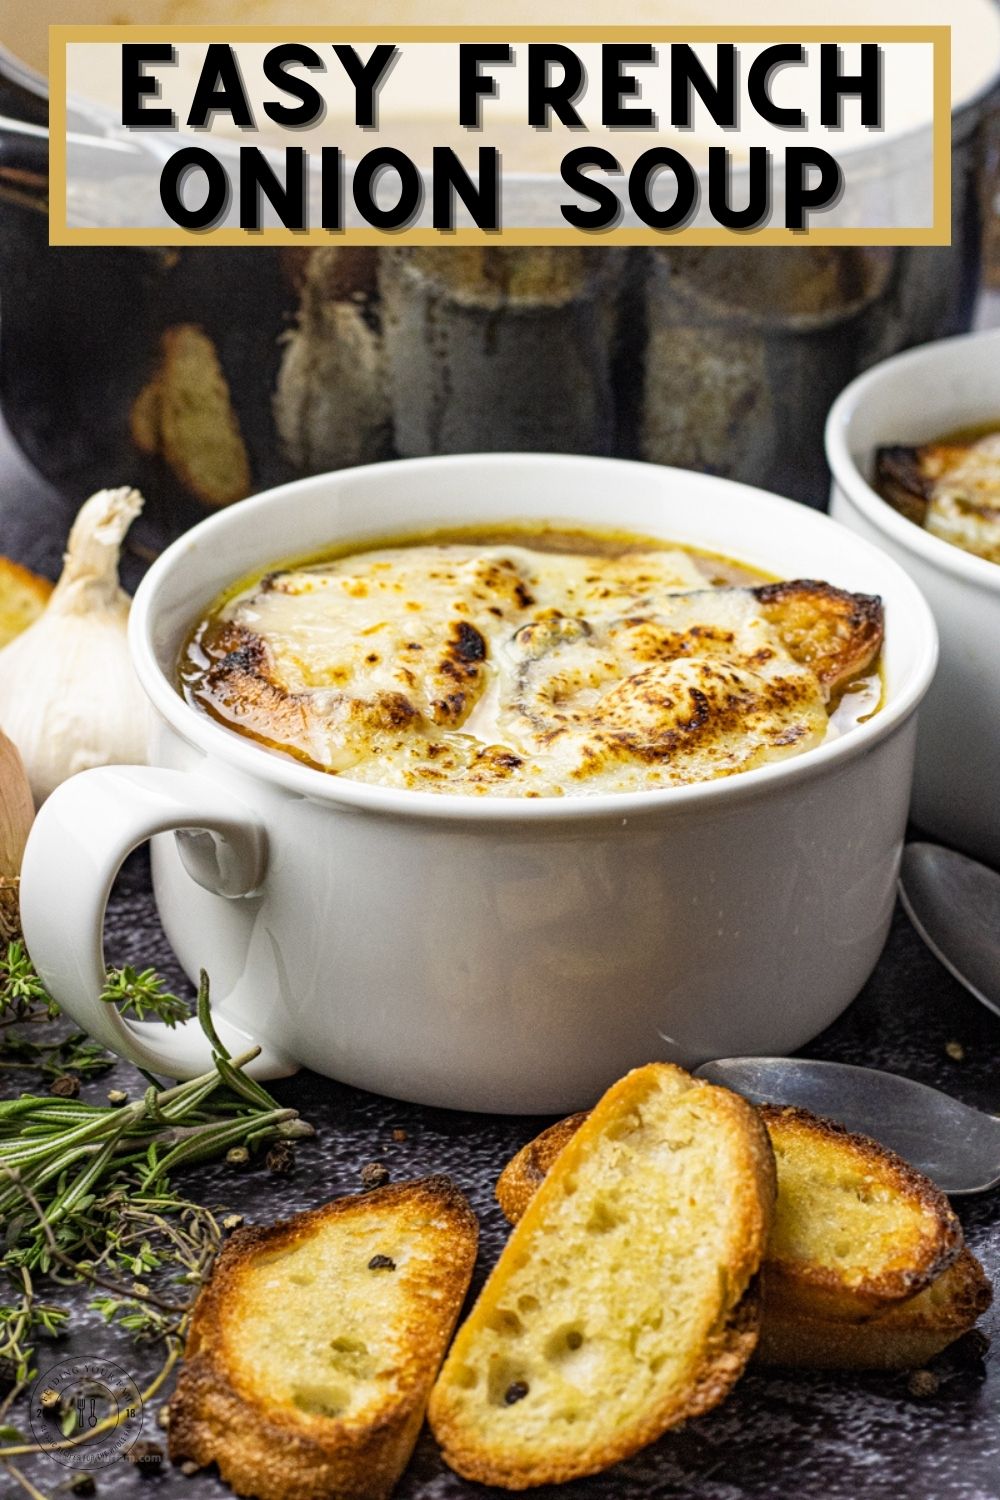 French Onion Soup is such a classic soup. This French Onion Soup Recipe is perfect for a simple weeknight family meal. You might think no one would eat a bowl full of onions, but this robust soup will have them coming back for more and requesting it often.